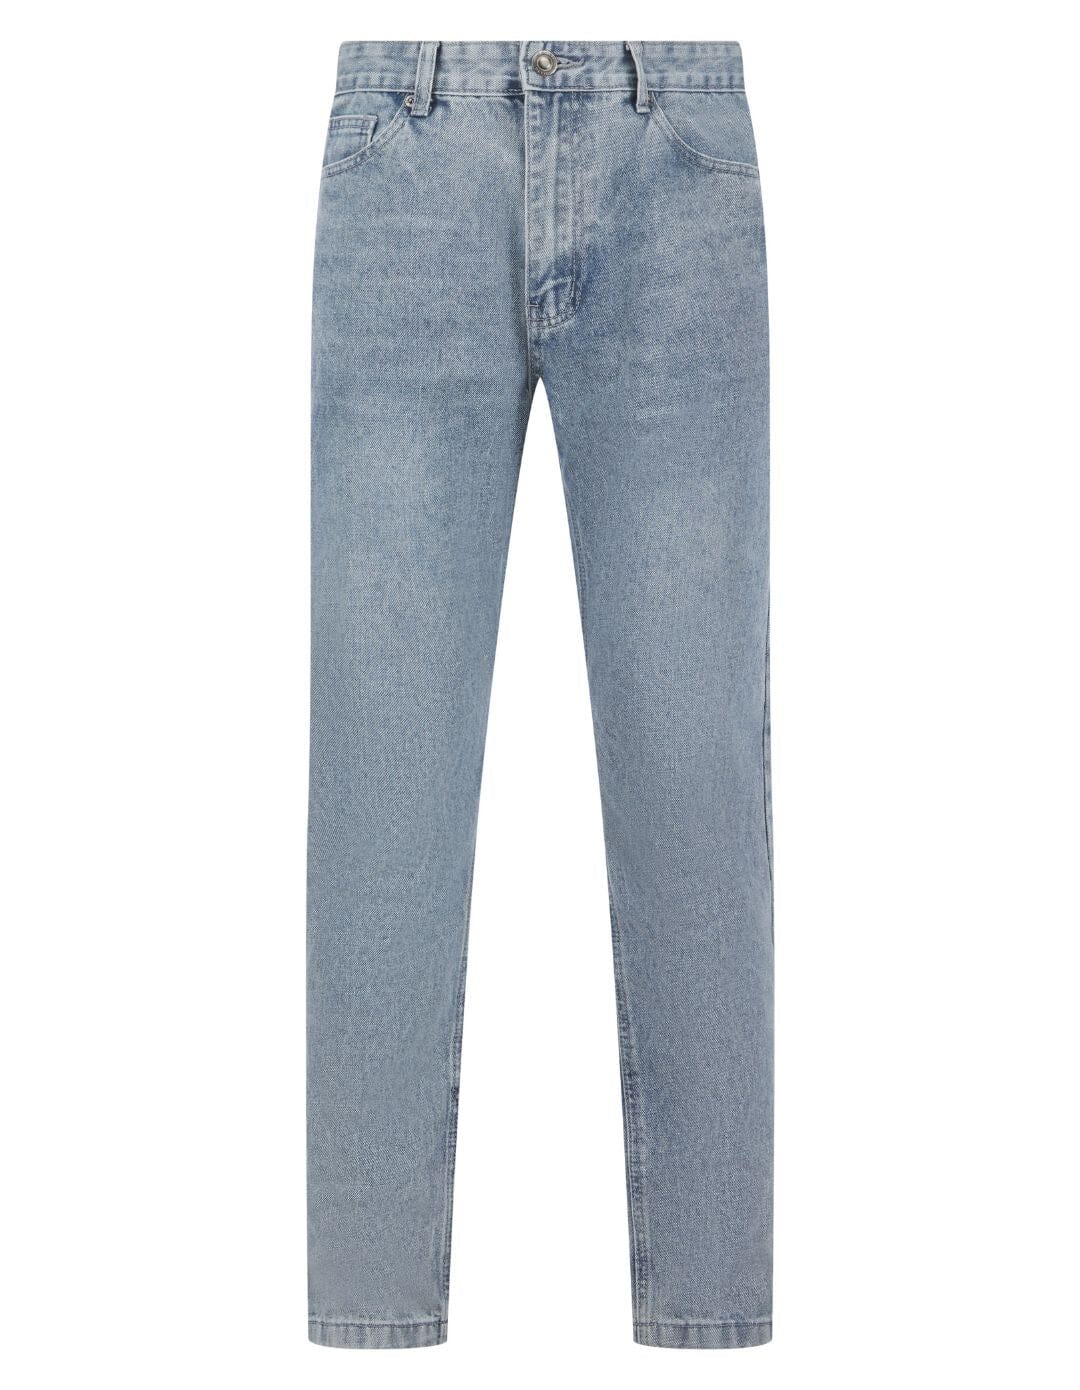 Washed Blue Straight Leg Jeans